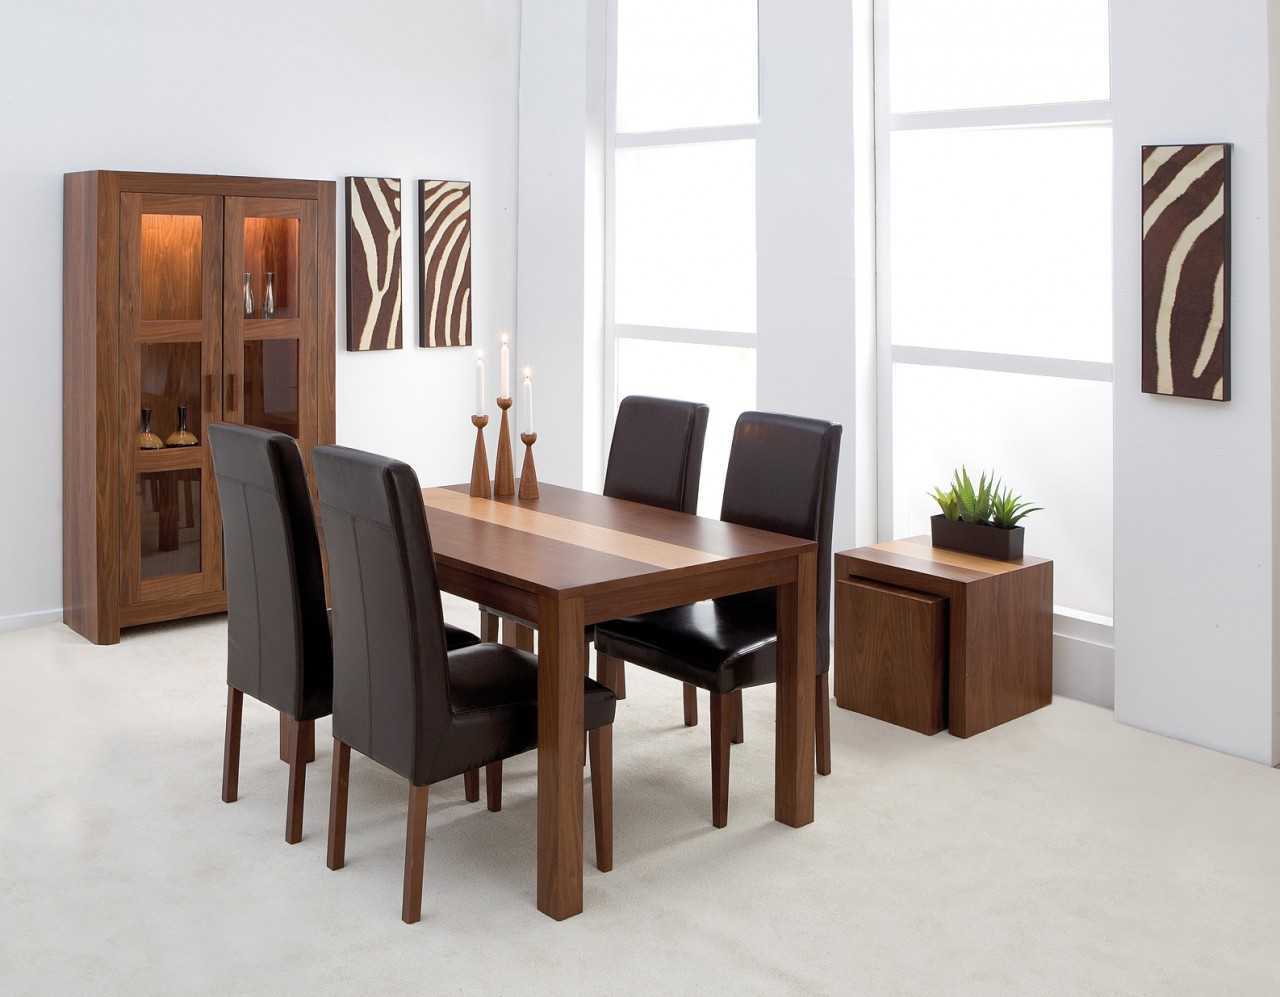 Dining tables and chairs-image